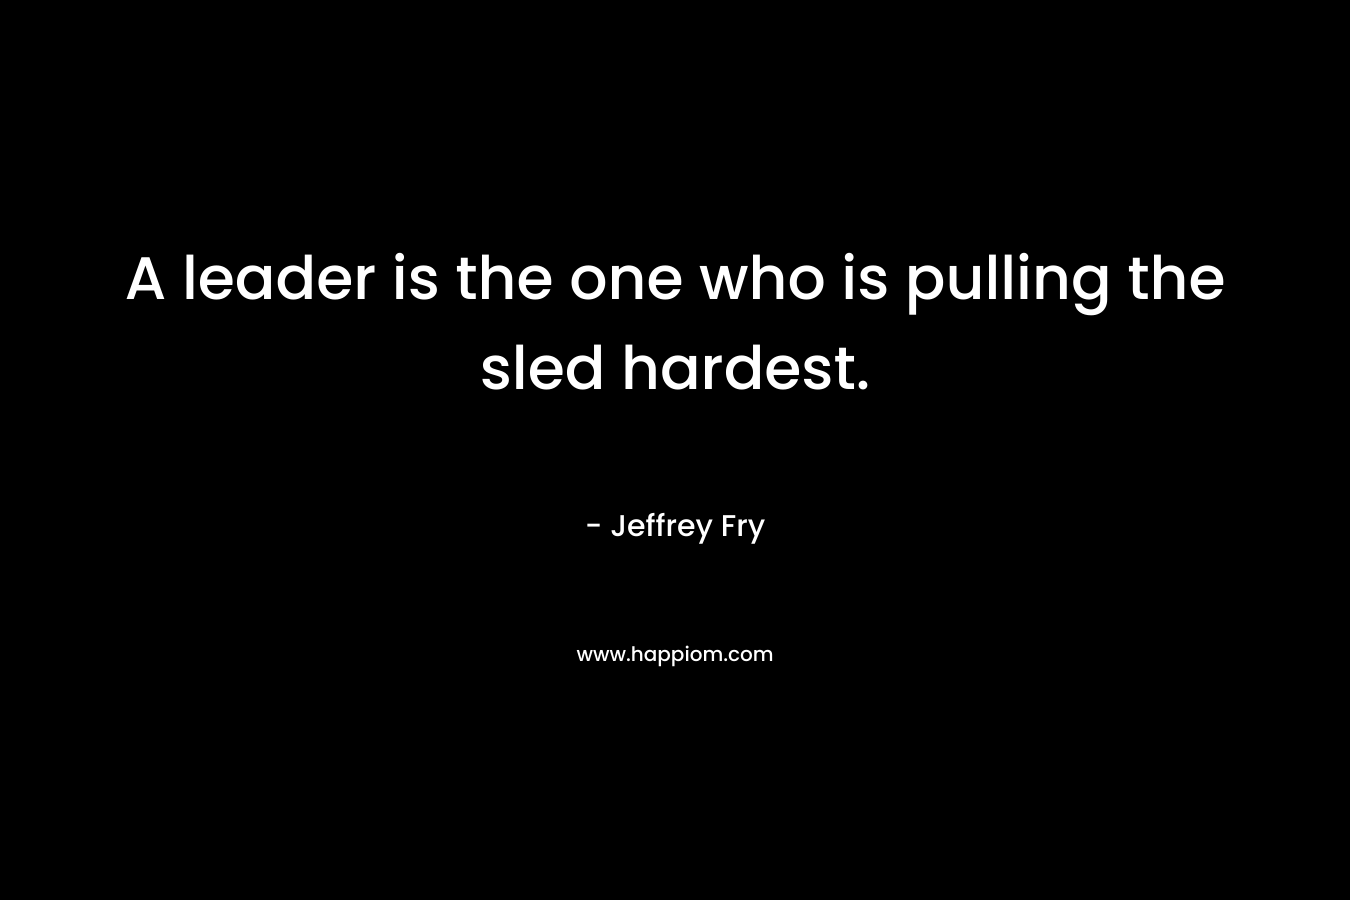 A leader is the one who is pulling the sled hardest.